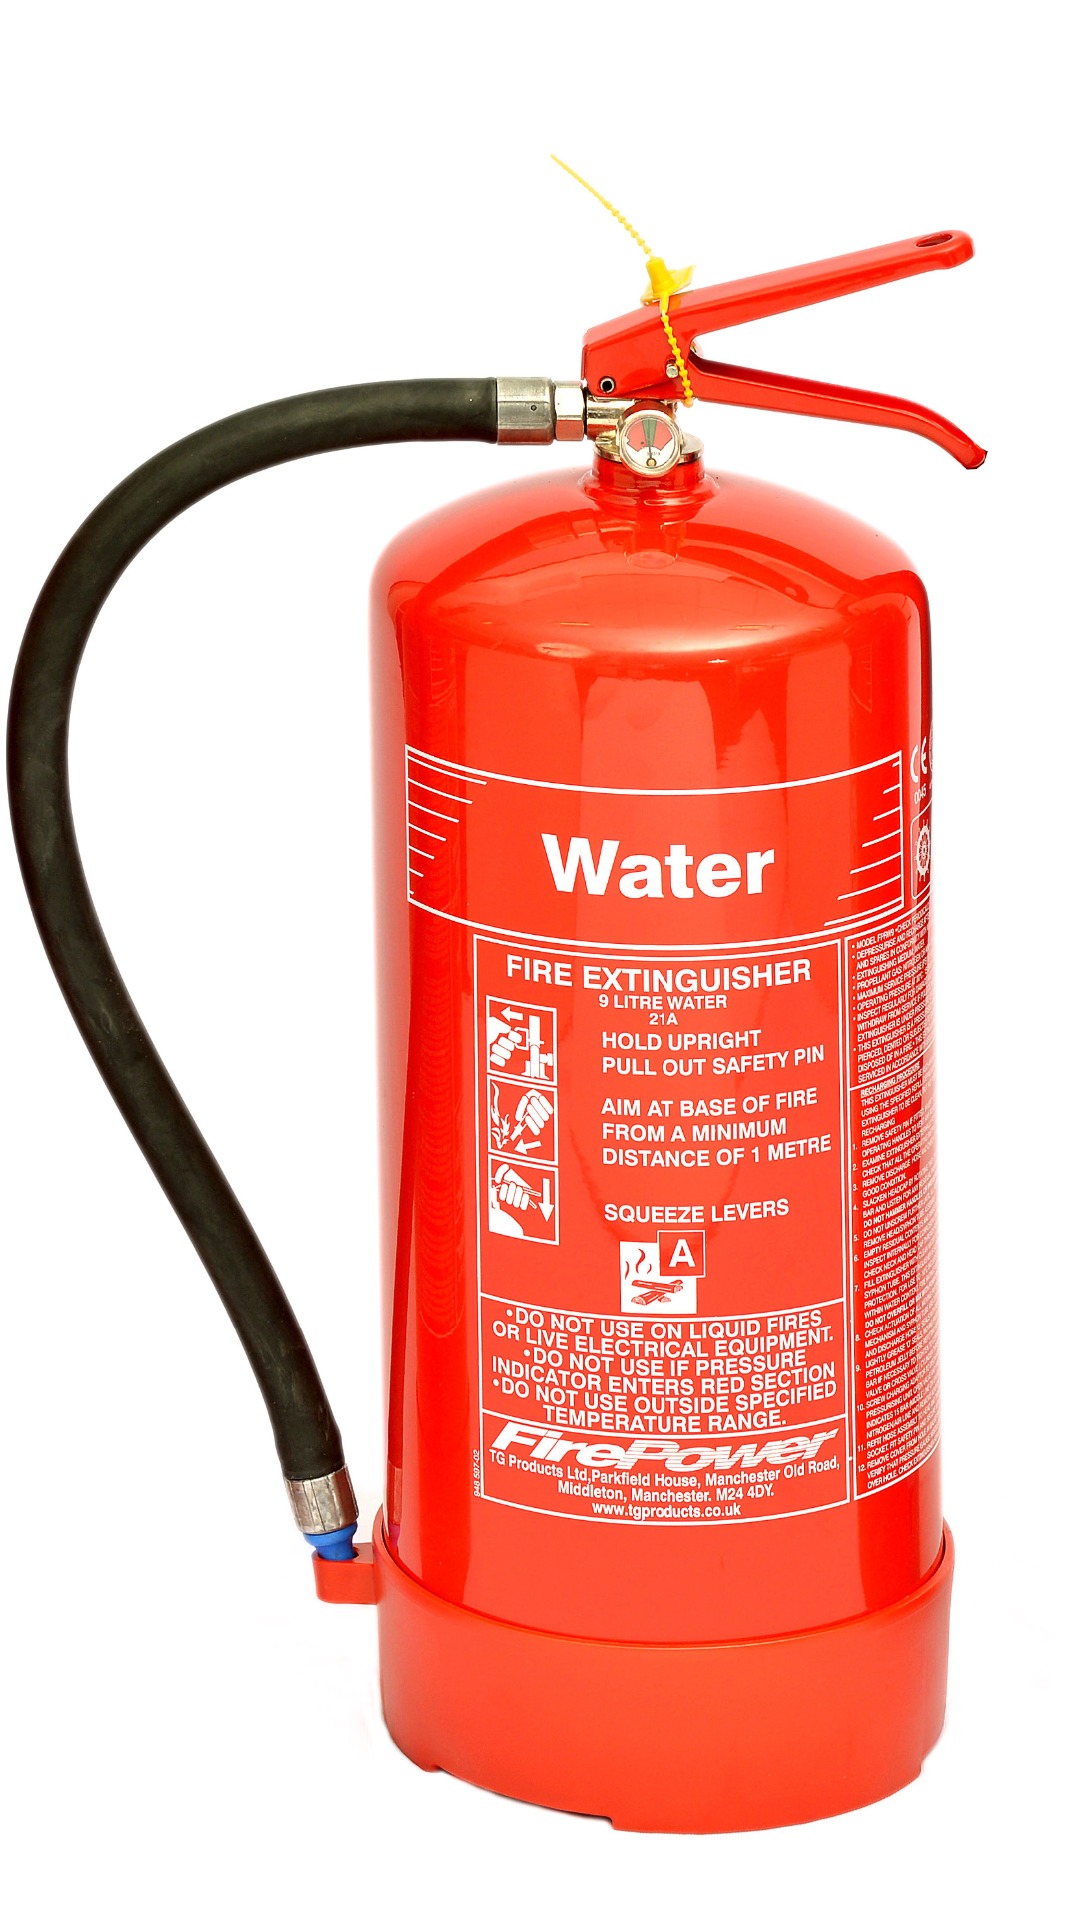 Midland Fire - 9 Litre Water fire Extinguisher